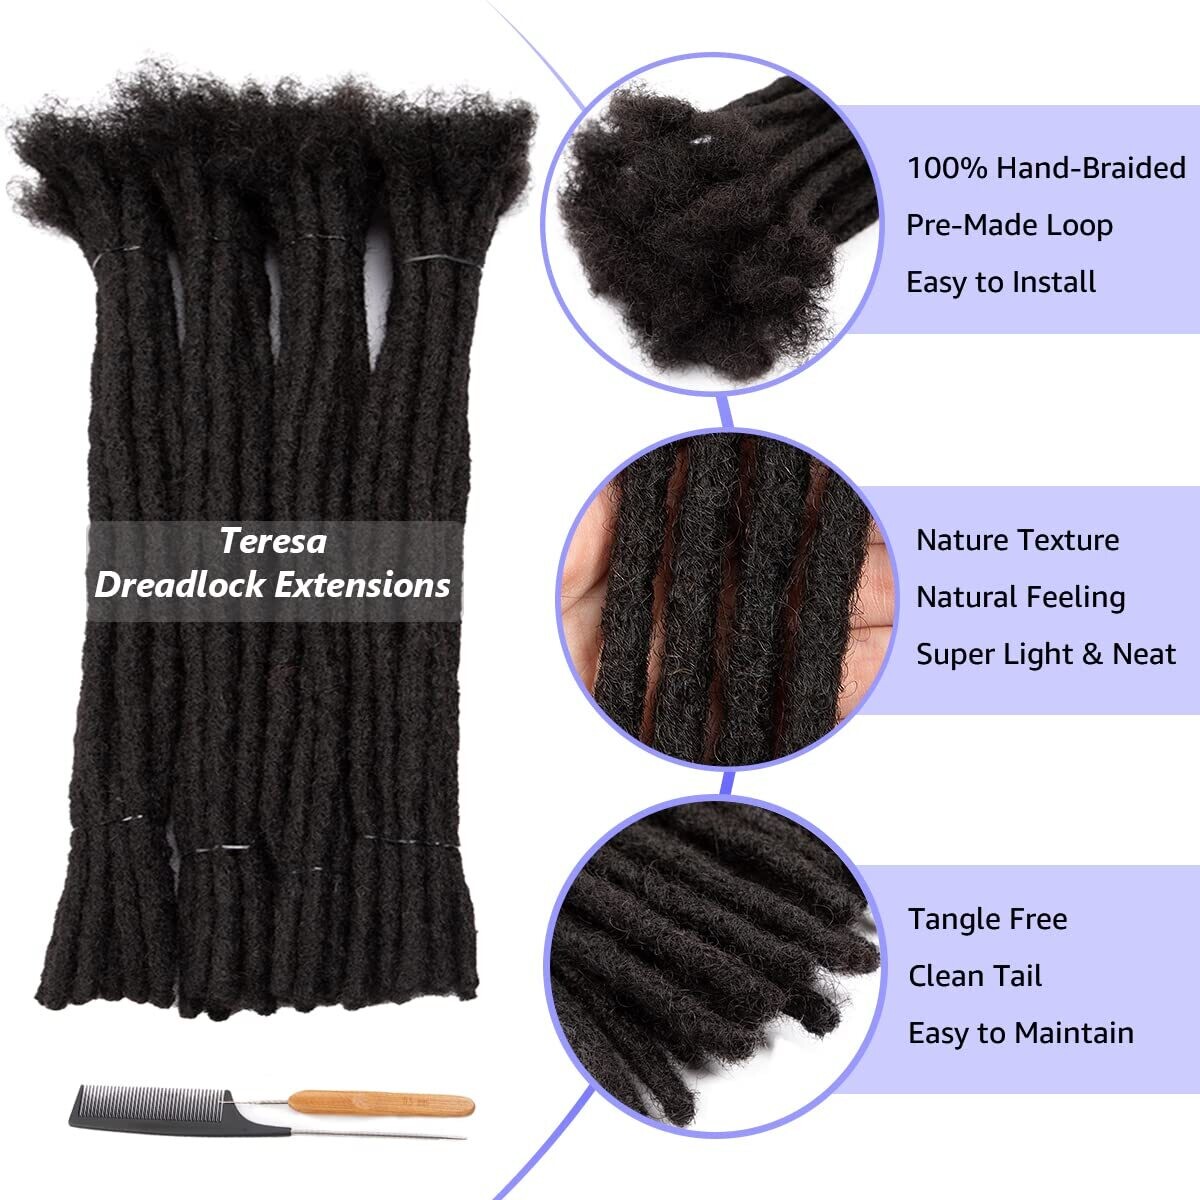 8 Inch ,10 Strands 100% Human Hair Dreadlock Extensions for Men/Women/Kids   Width Full Hand-made Permanent Dread Locs Extensions Human Hair Can  Be Dyed ,Curled and Bleached,Natural Black